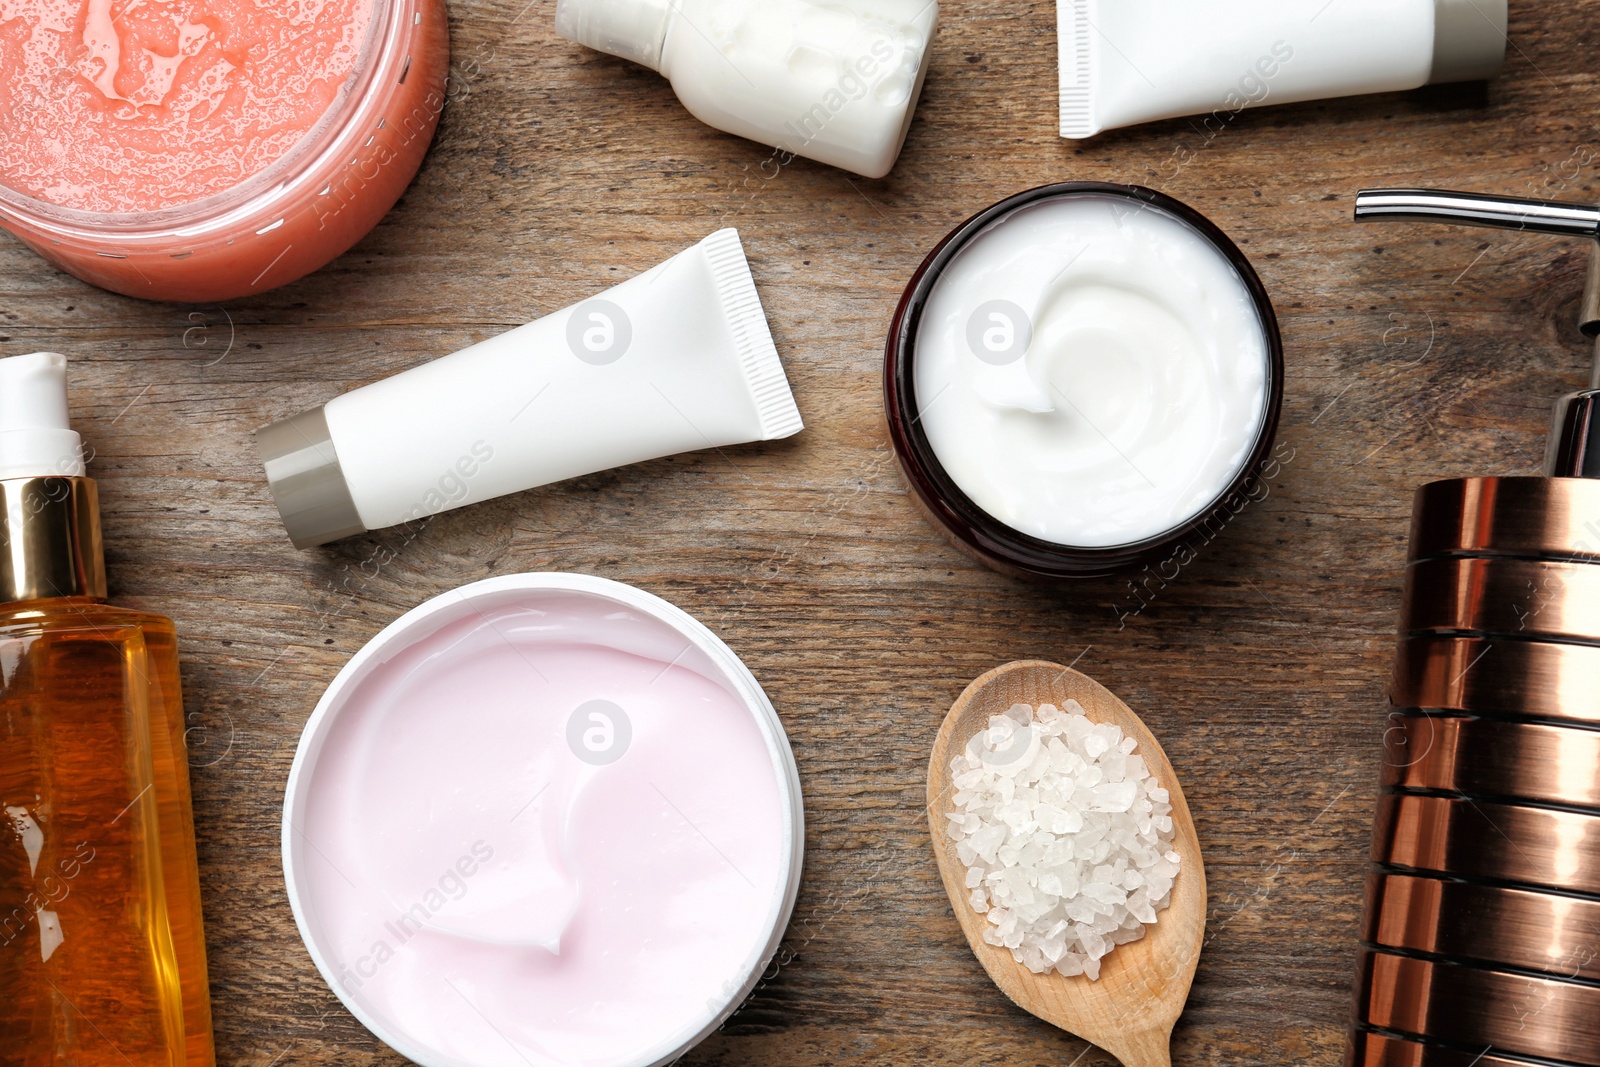 Photo of Flat lay composition with body care products on wooden background